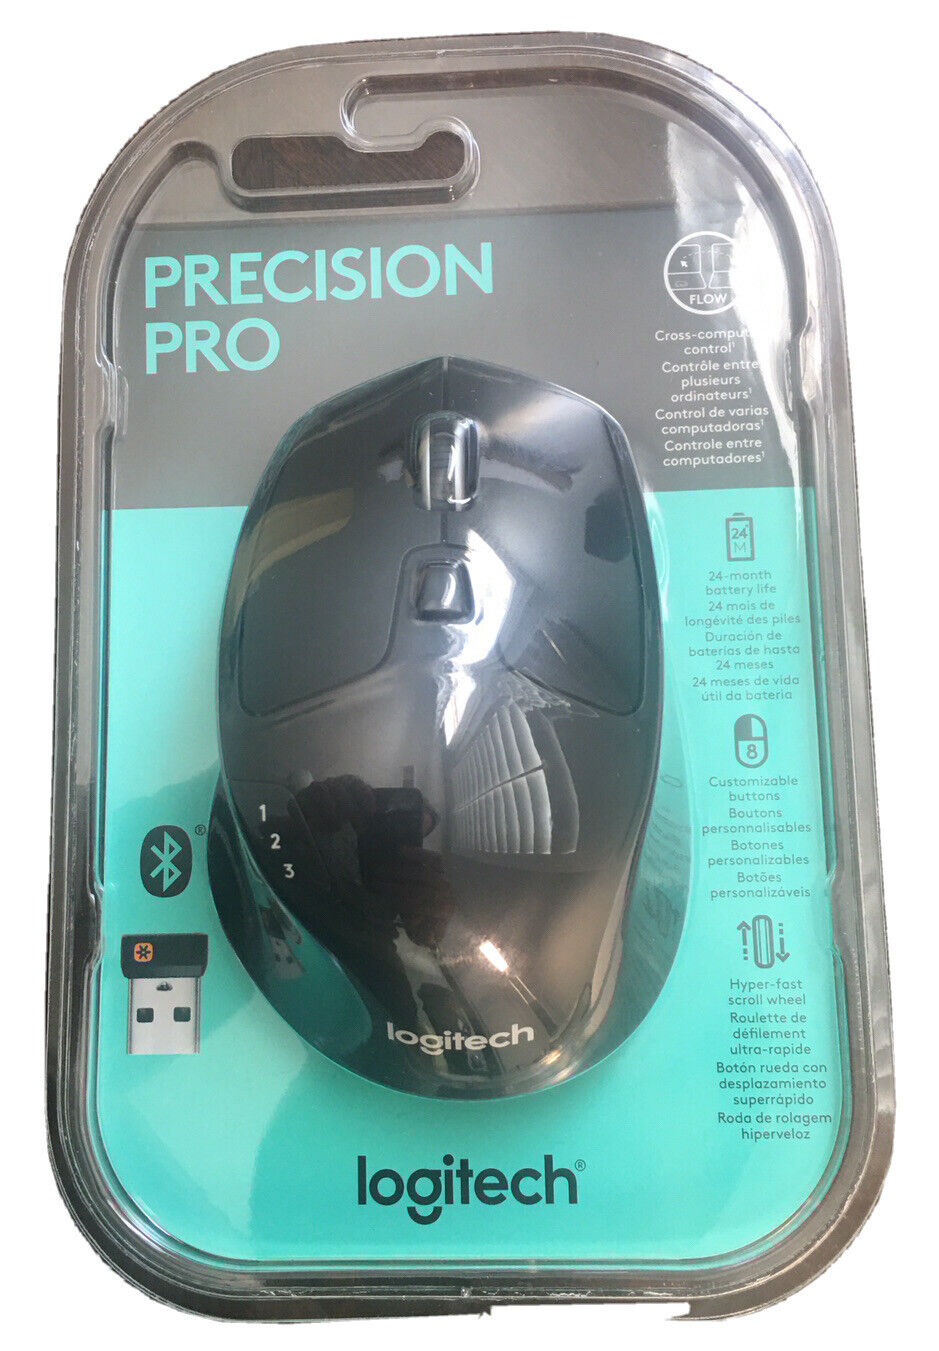 Logitech Precision Pro Wireless Mouse NEW in Original Packaging